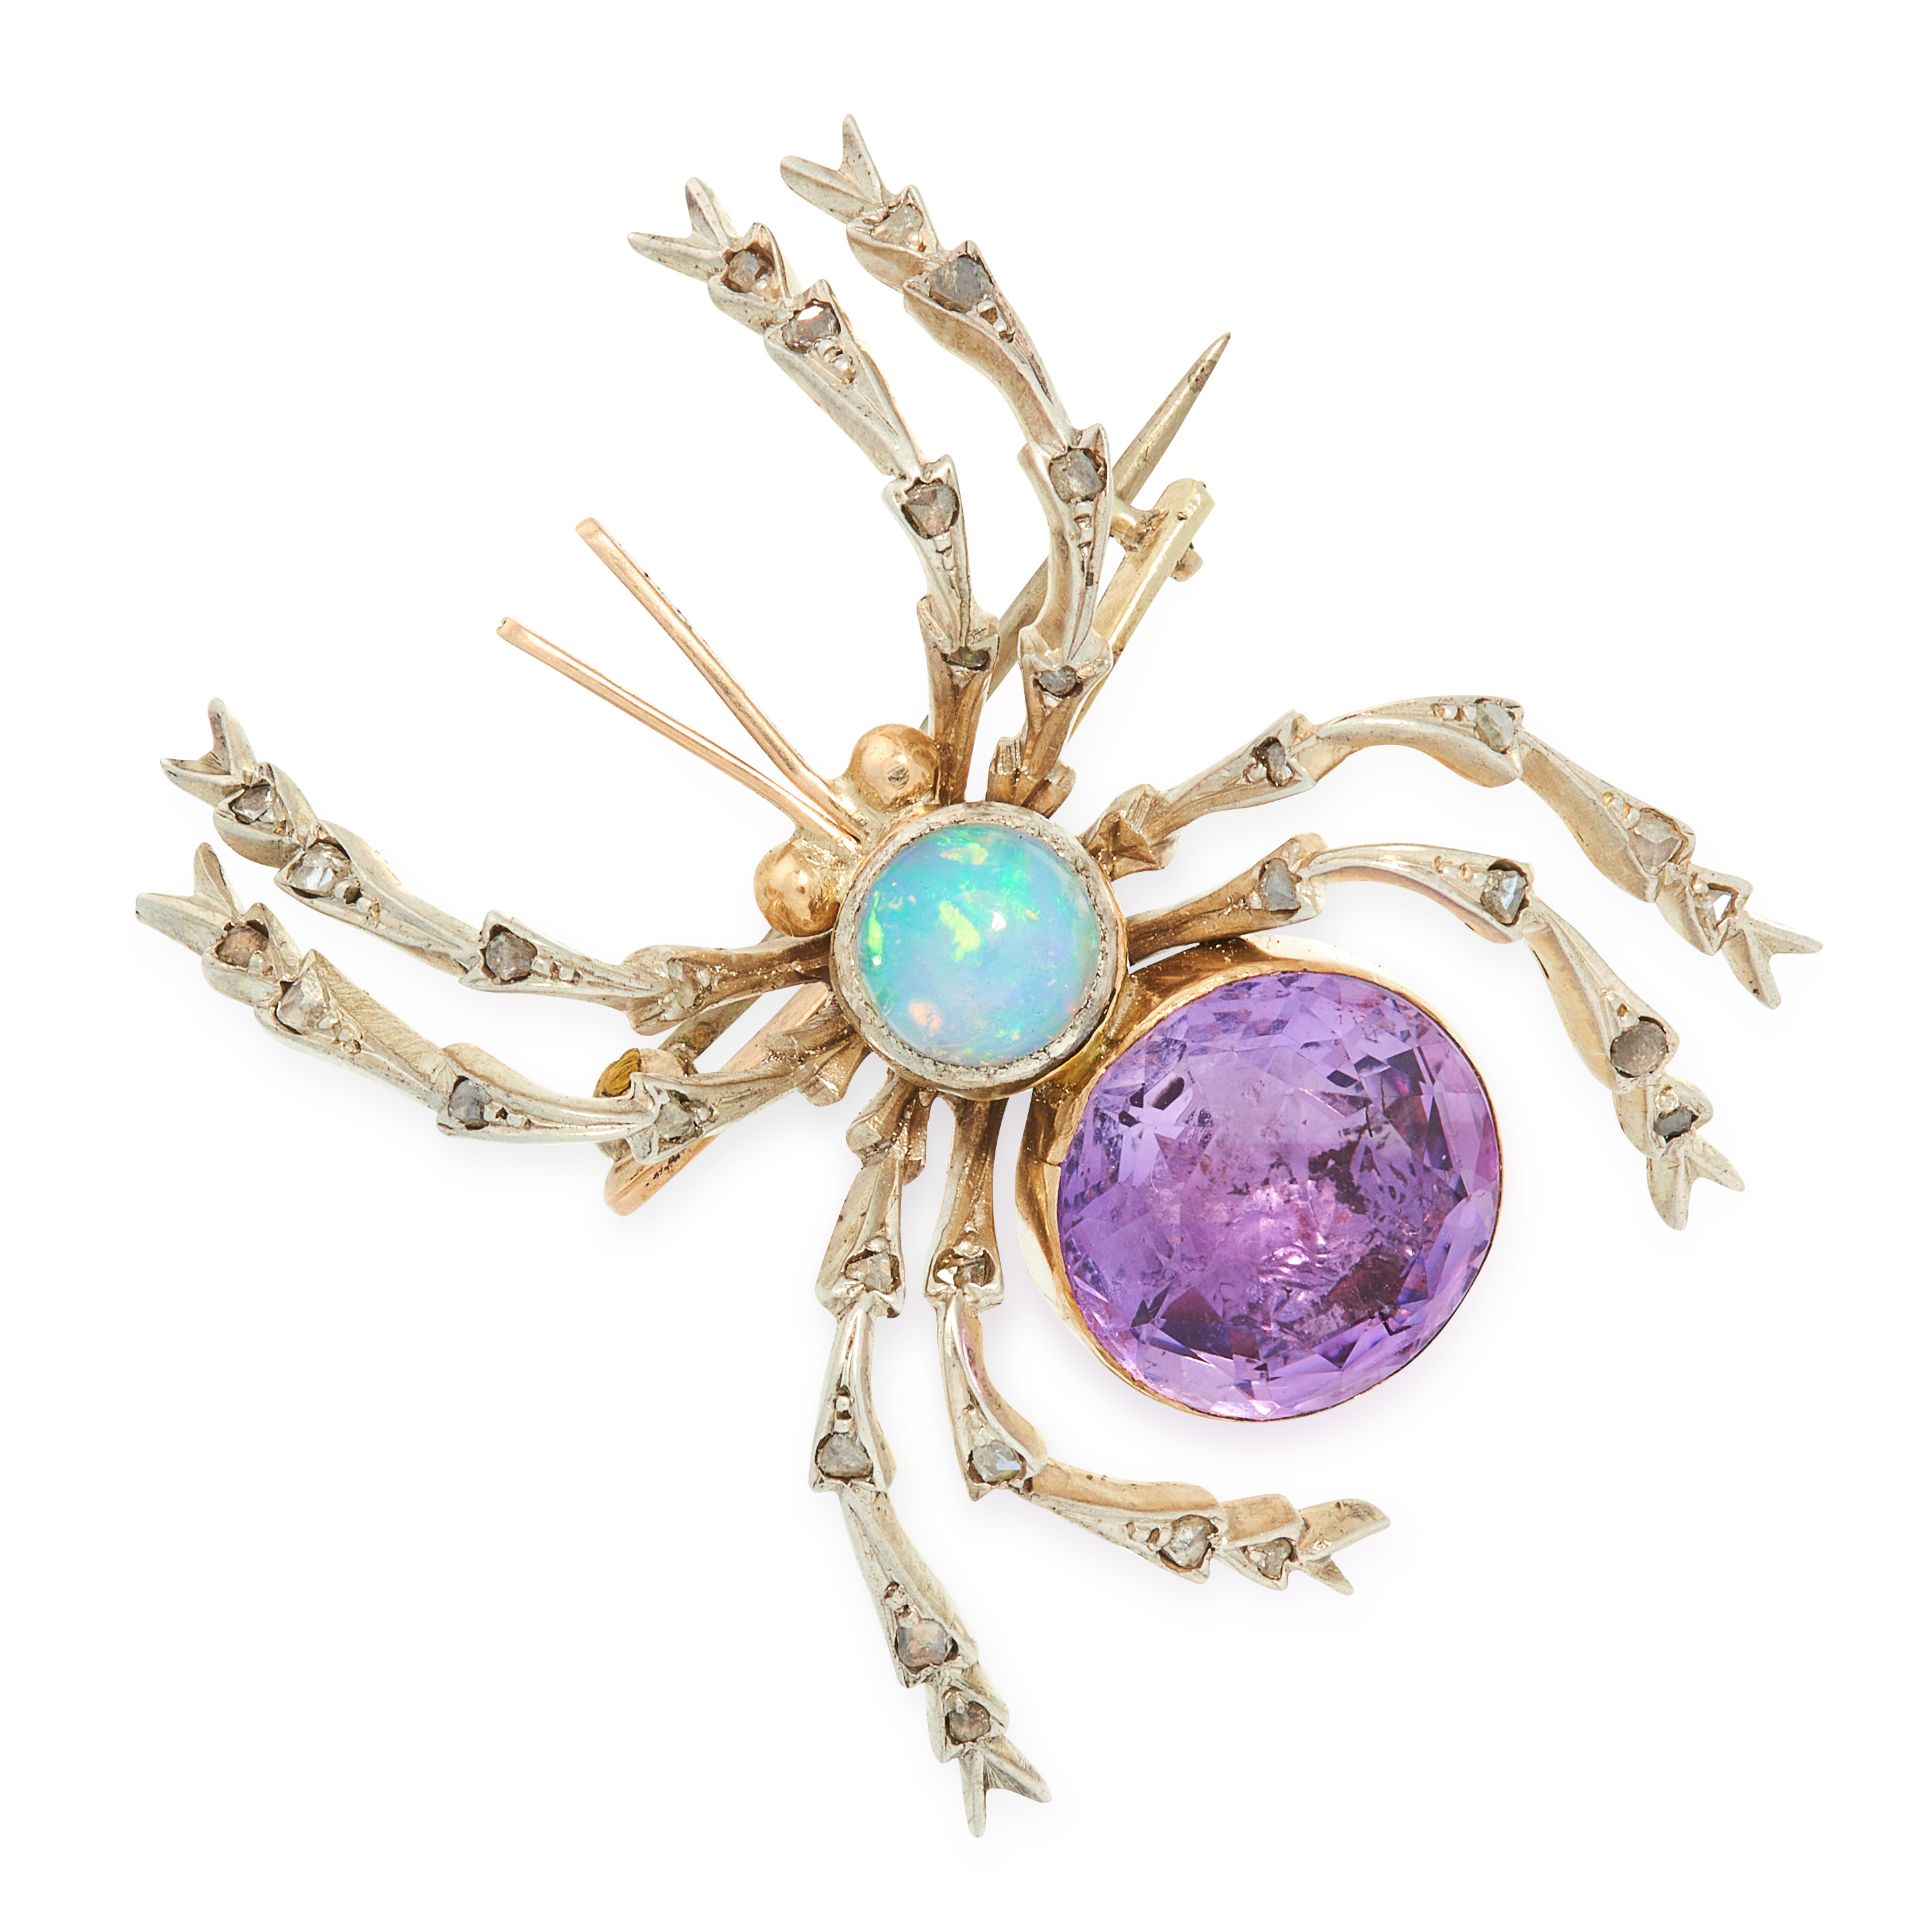 AN ANTIQUE AMETHYST, OPAL AND DIAMOND SPIDER BROOCH in yellow gold and silver, designed as a spider,